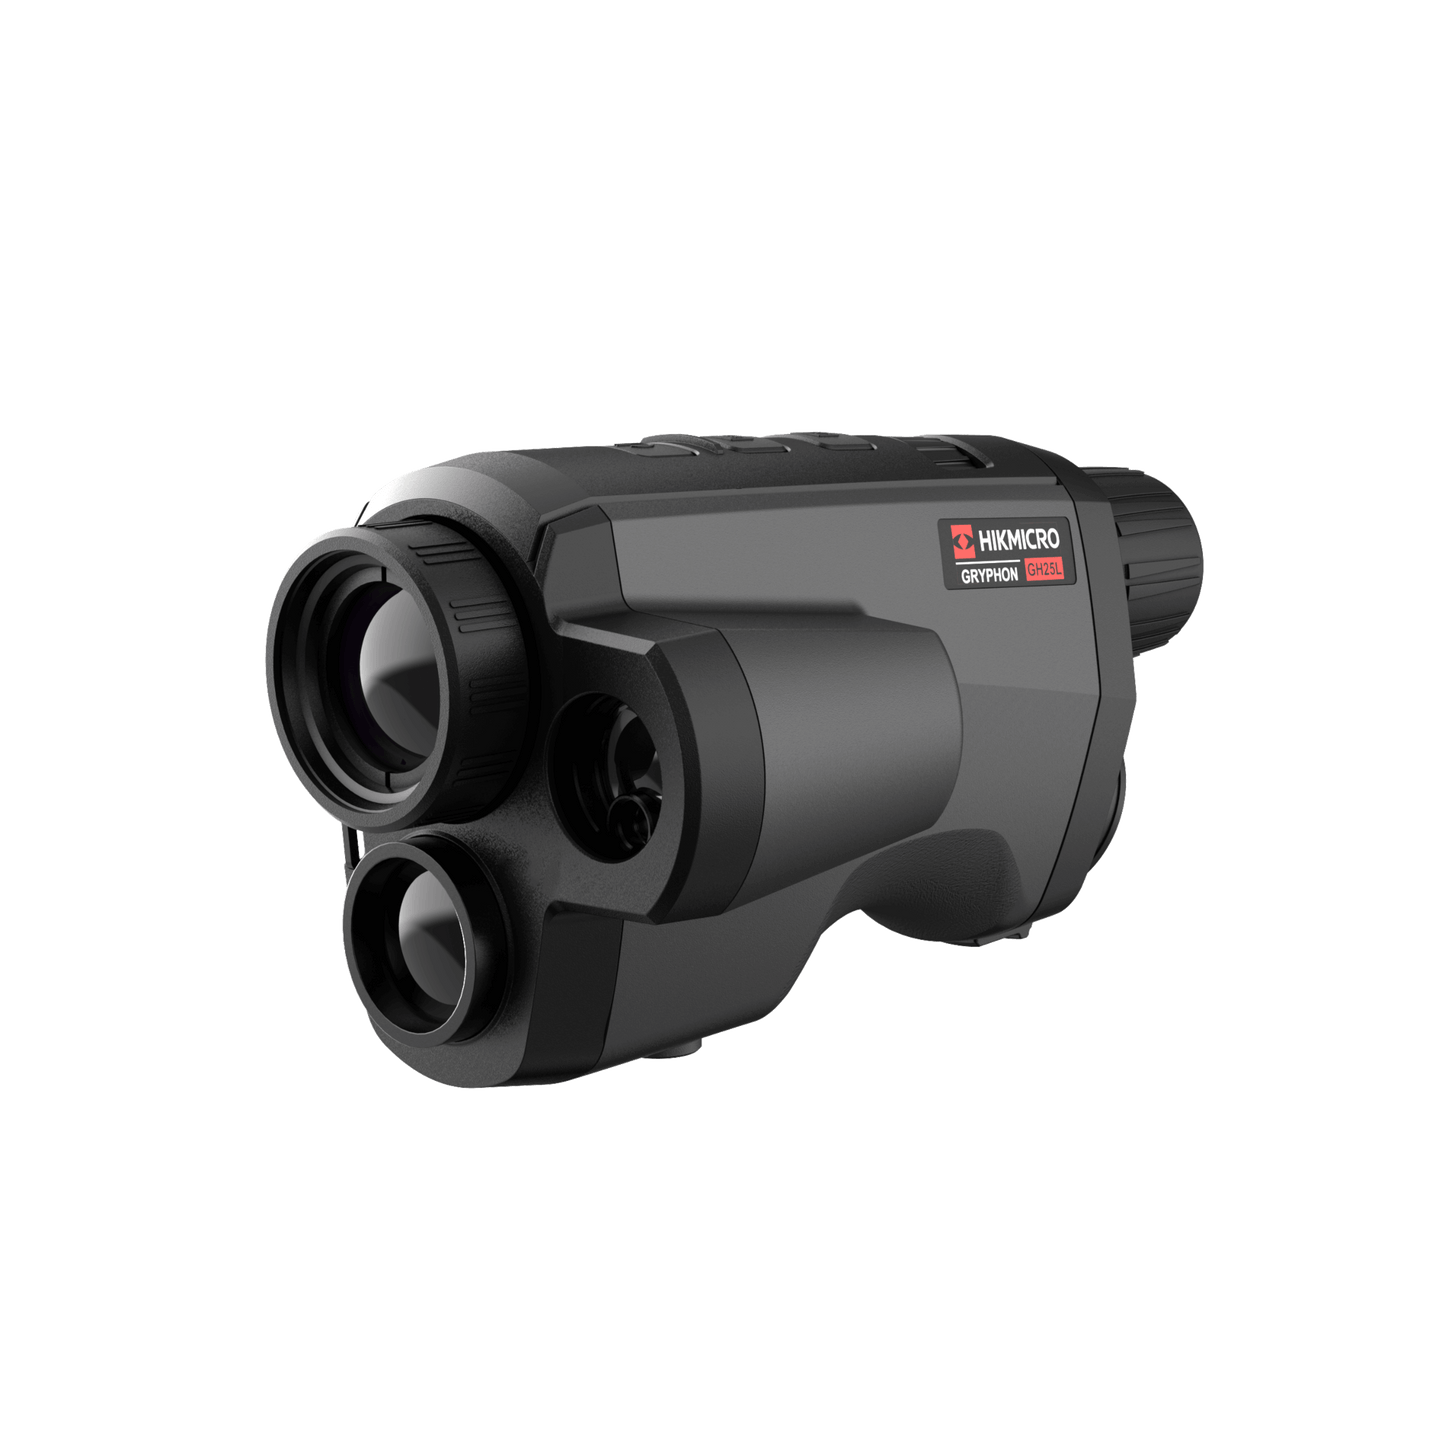 Cape Thermal imaging monocular for sale - HikMicro Gryphon GH25L Handheld thermal monocular front left view with laser range finder